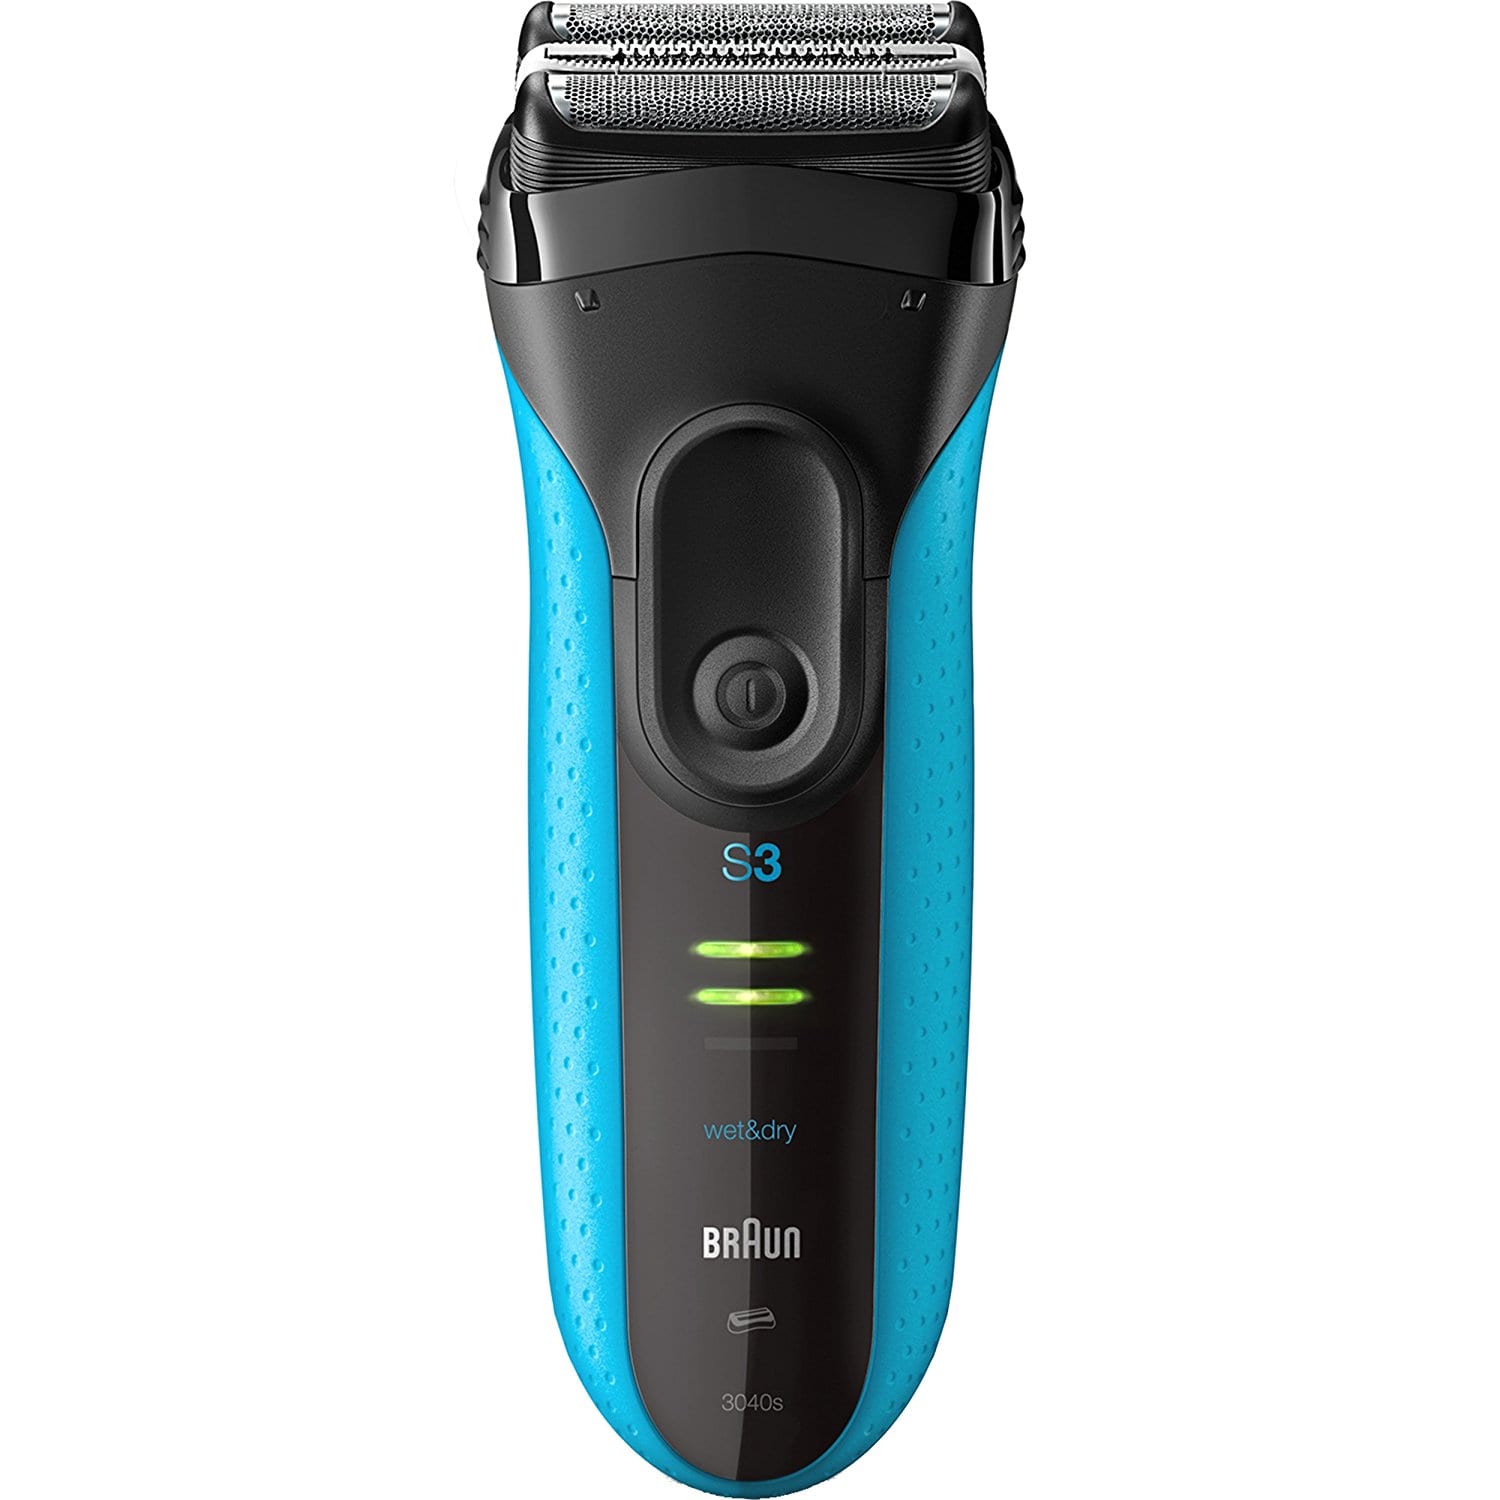 Best Electric Shavers 2017: Braun Series 3 Wet/Dry Shaver 2018